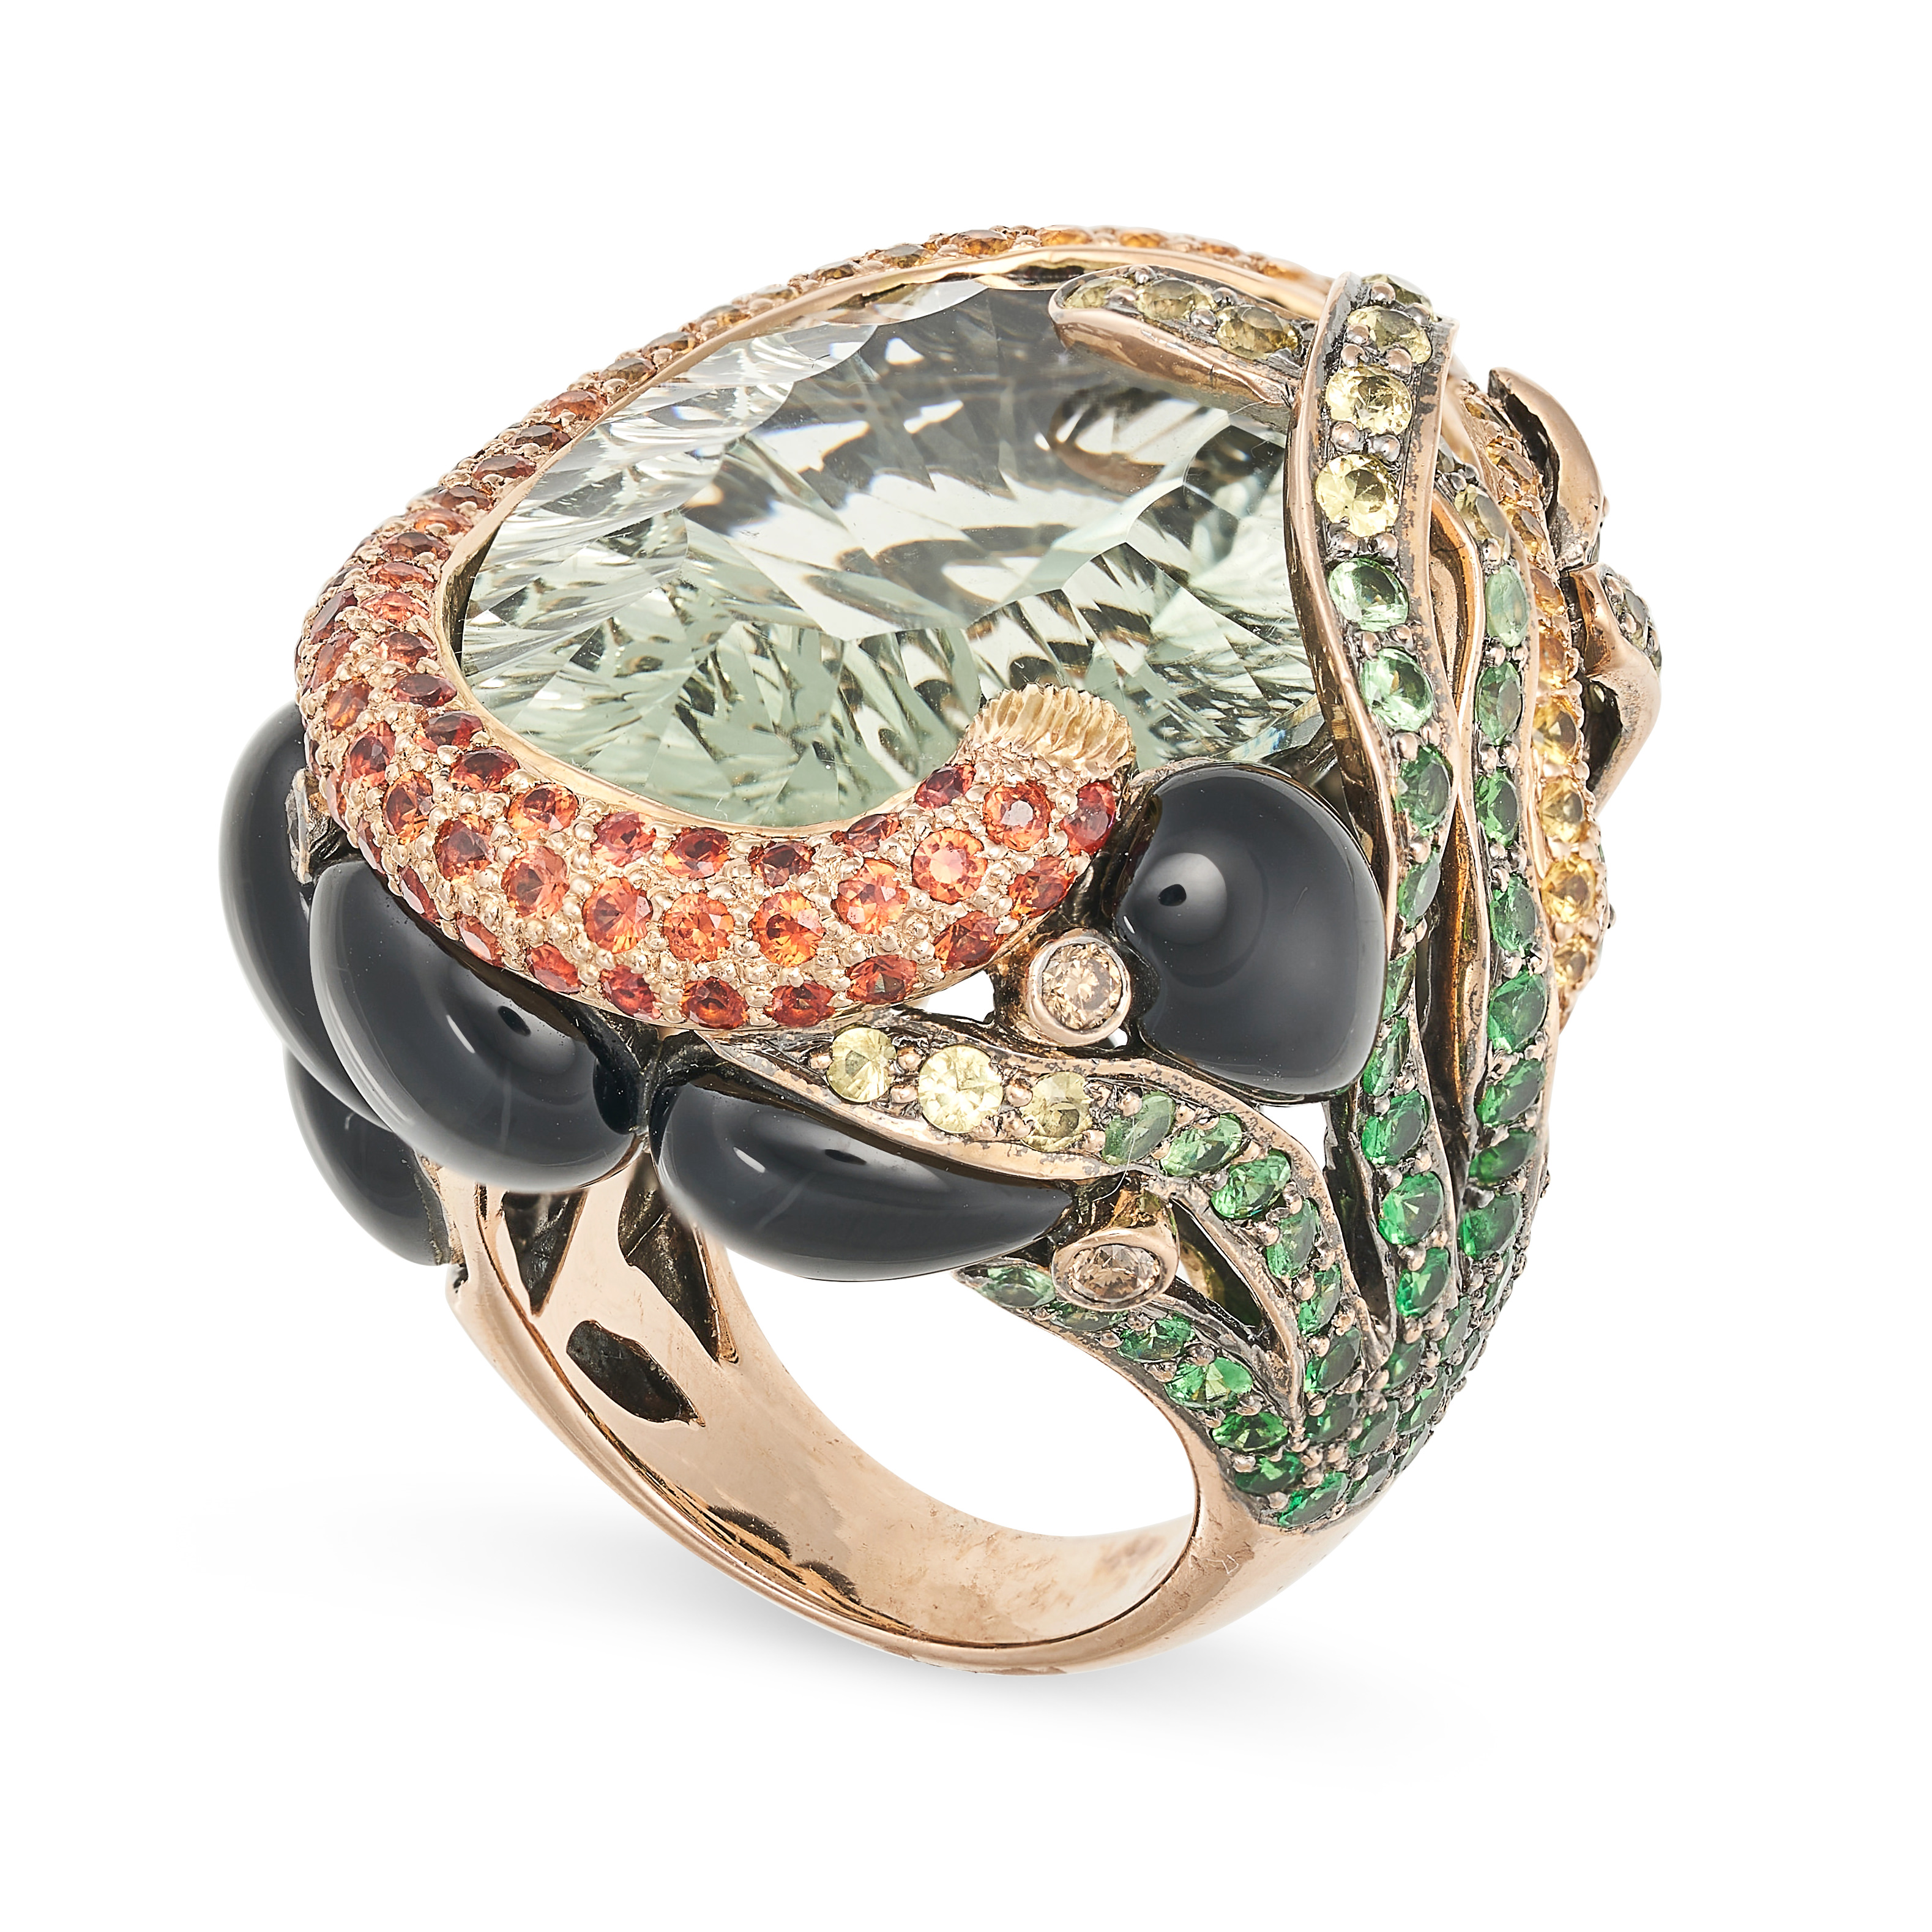 A PRASIOLITE, ONYX, GARNET AND DIAMOND COCKTAIL RING in 18ct rose gold, set with an oval fancy mi... - Image 2 of 3